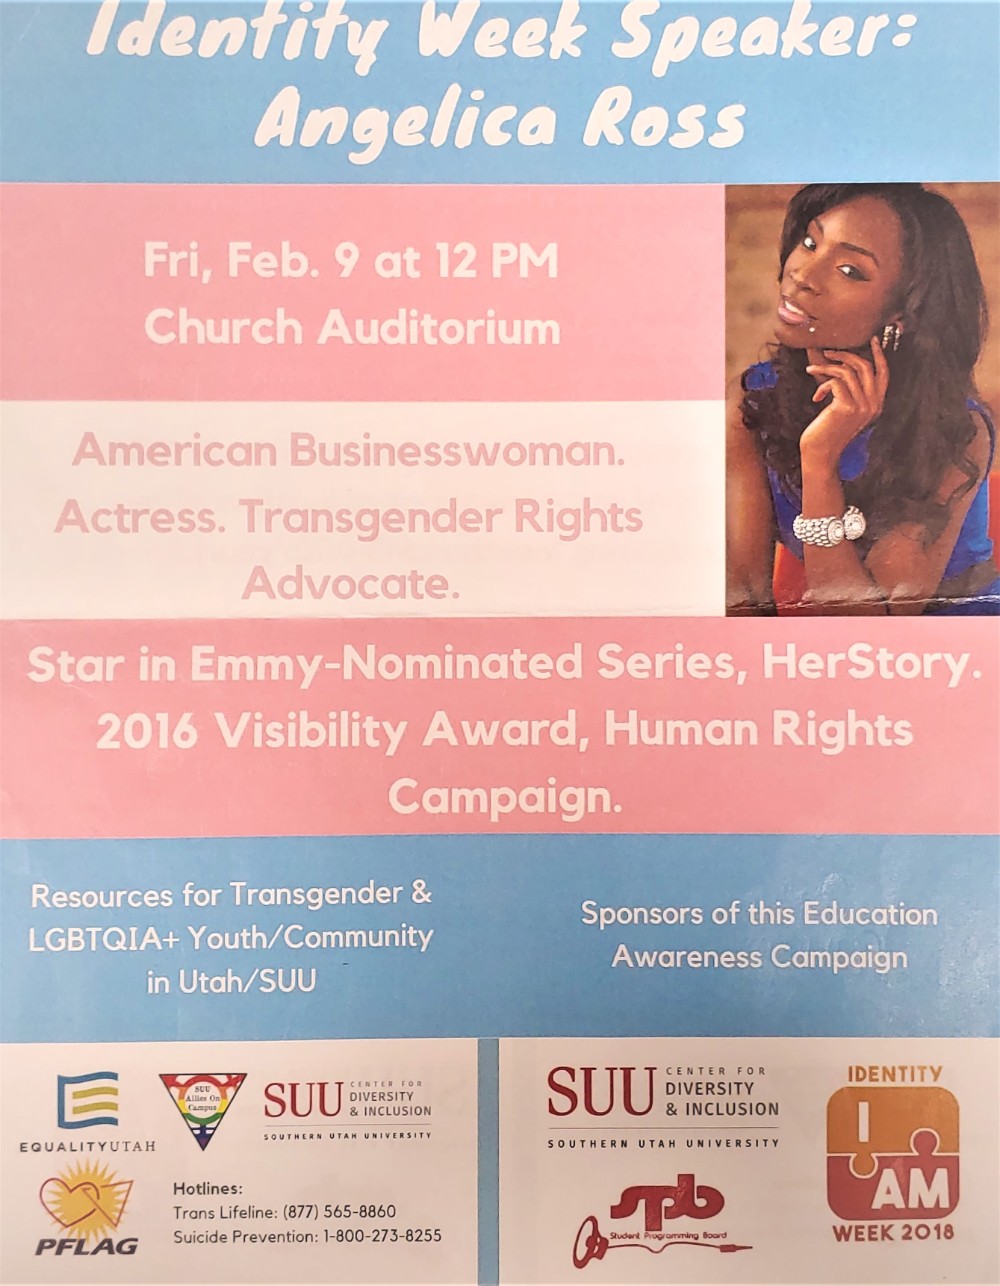 Identity Week Speaker: Angelica Ross. American Businesswoman. Actress. Transgender Rights Advocate. Star in Emmy-Nominated Series, HerStory. 2016 Visibility Award, Human Rights Campaign.